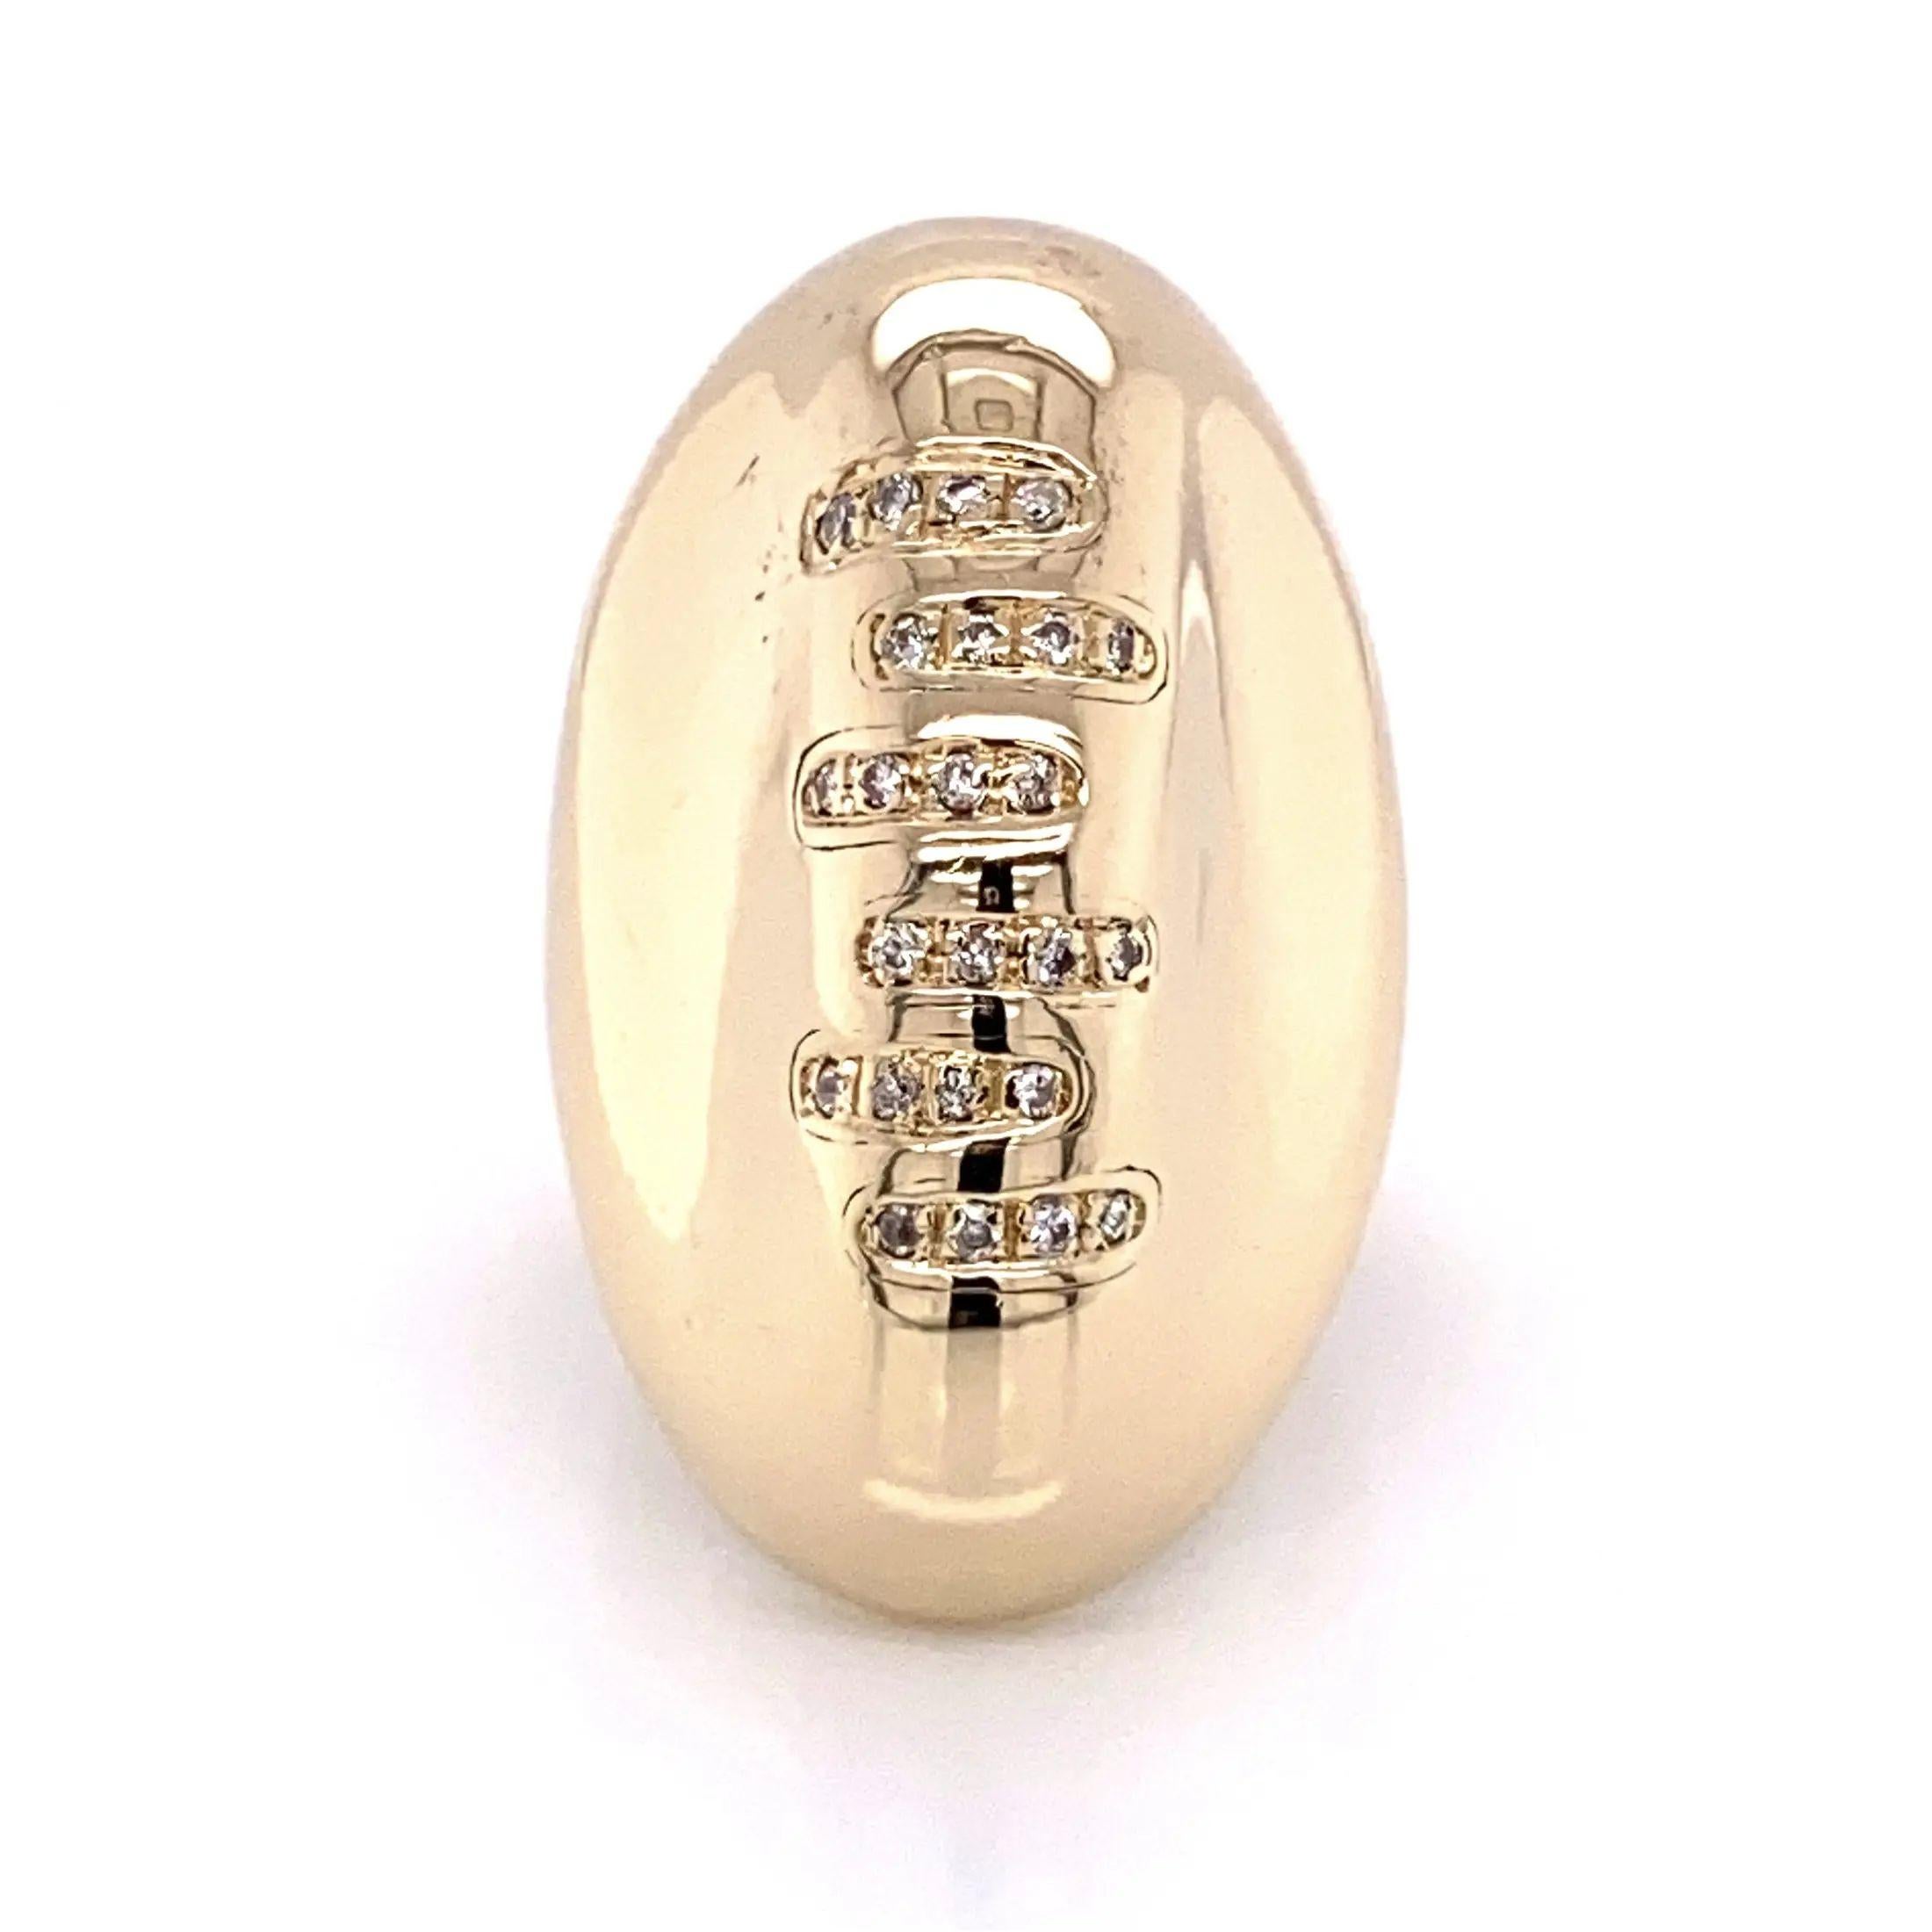 Unique Gent's Gold and Diamond Football Ring. Laces Hand set with Diamonds, weighing approx. 0.33 total Carat weight. Hand crafted 14 Karat yellow Gold Mounting. Size 6.5., we offer ring resizing.  For that Special Sports Enthusiast, including you! 